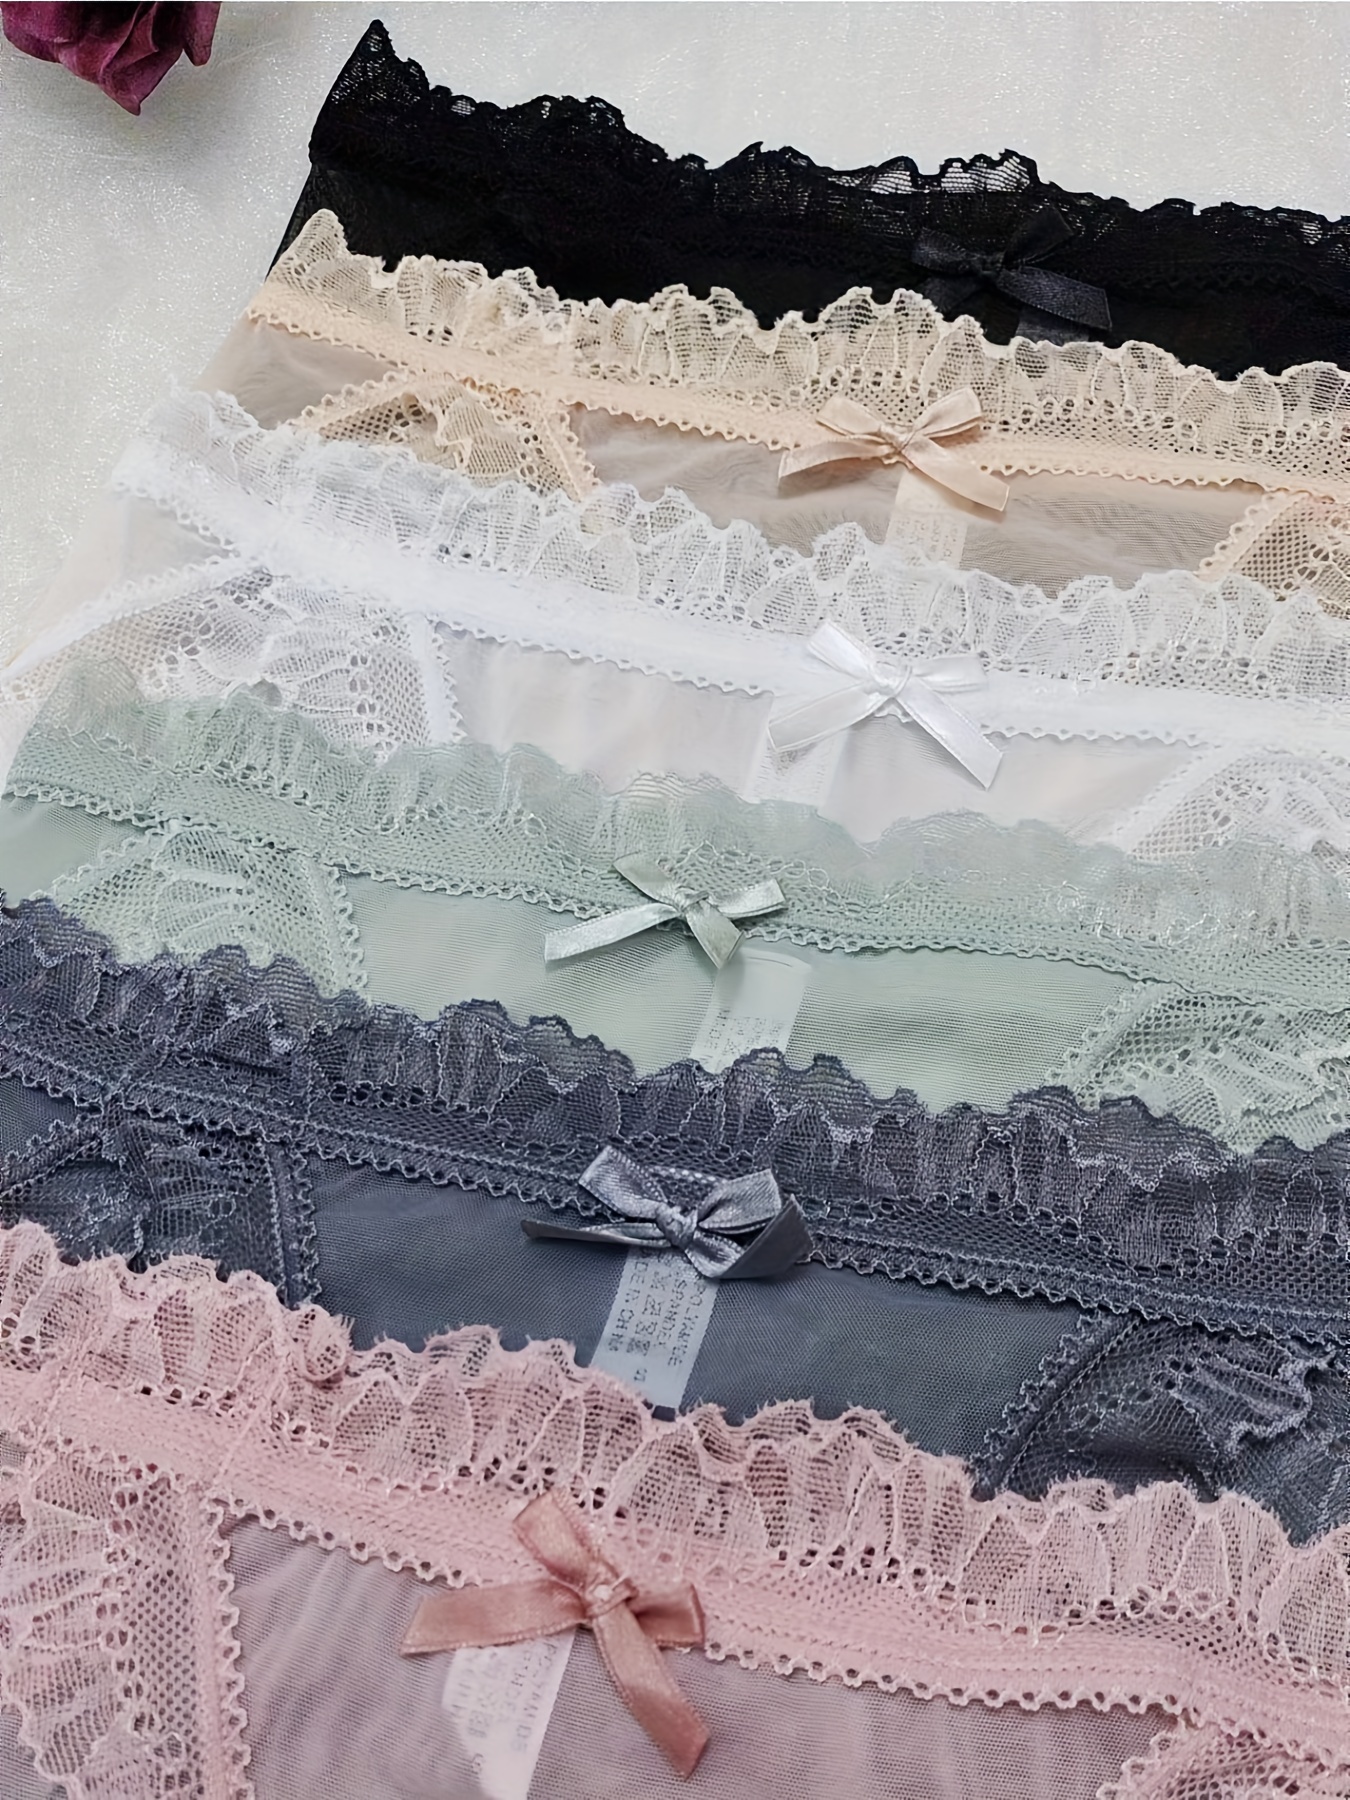 6 Pieces/Lot) New Fashion Underwear Women Transparent Lace Panties Women  Underwear Panties Ladies Girls Cute Full Lace Bow Cotton Briefs Knickers